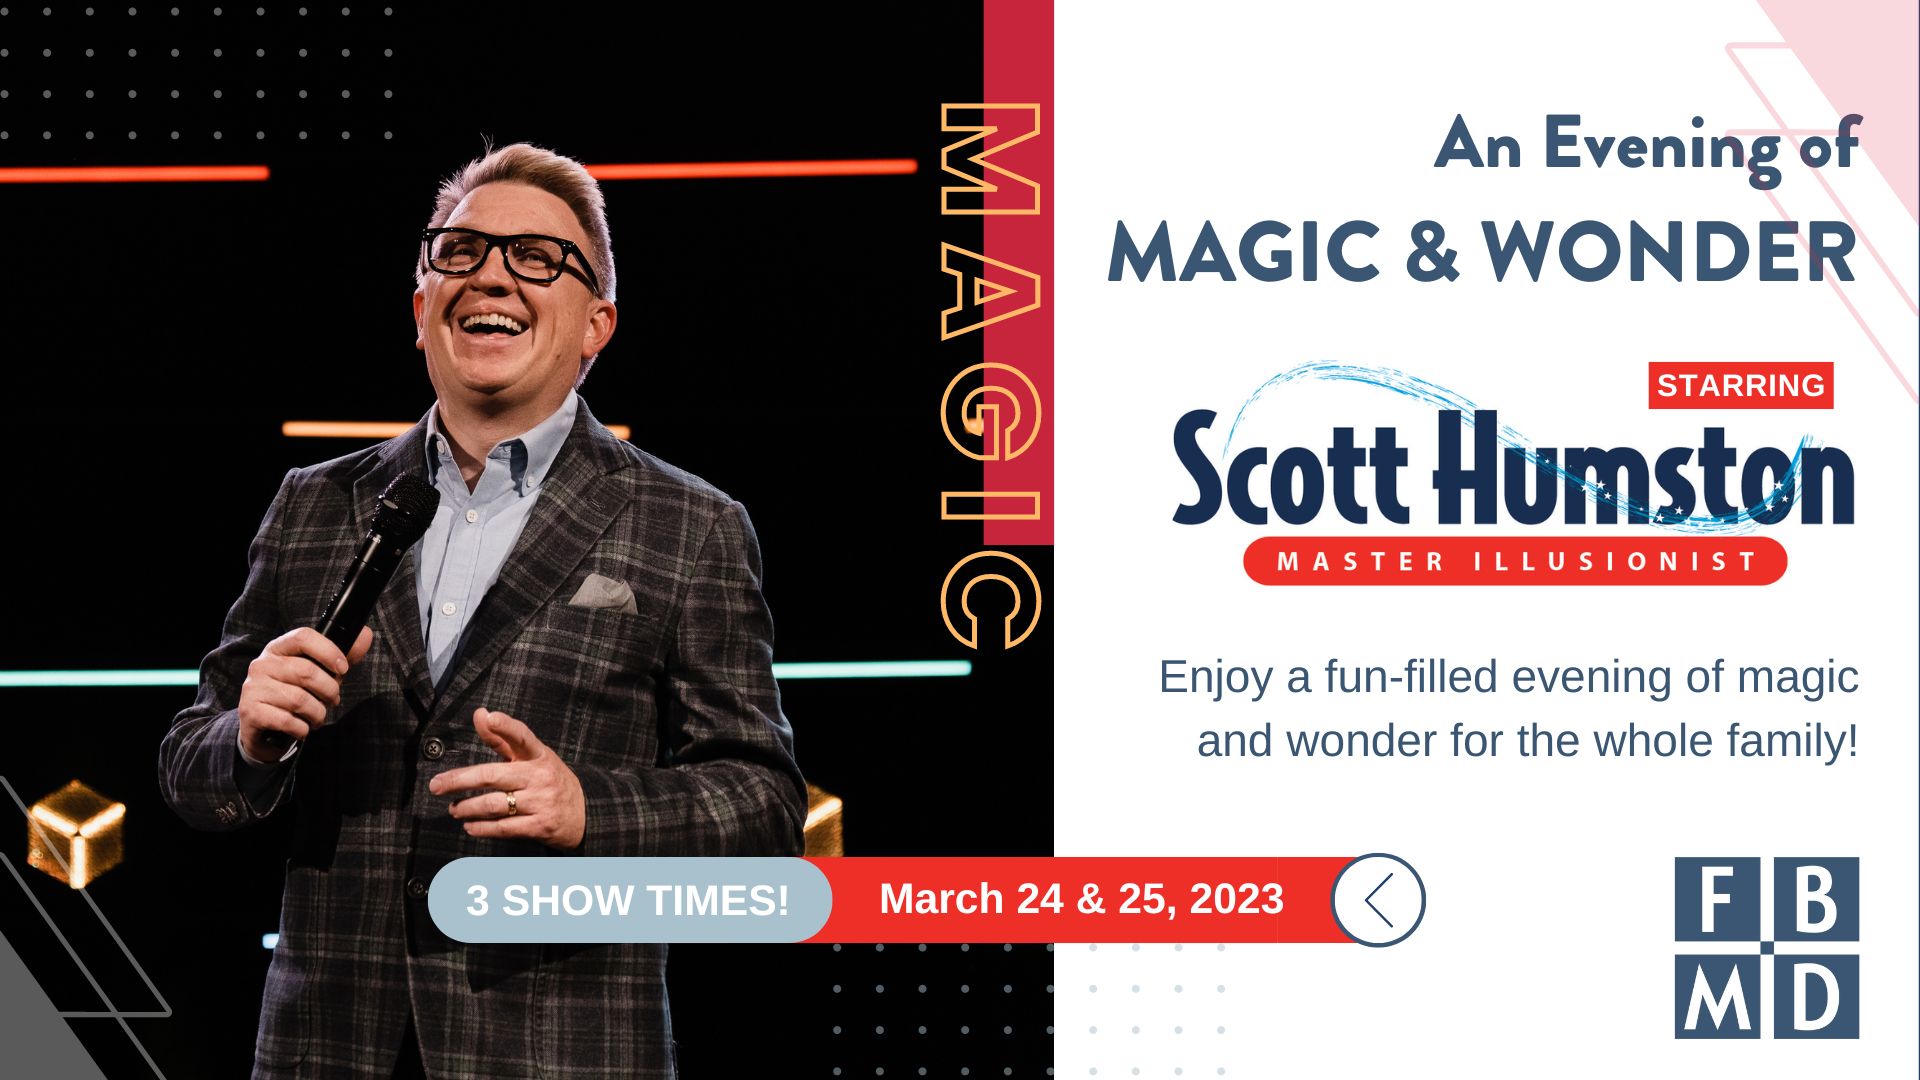 invitation for "An evening of magic and wonder" starring Scott Humston, Master Illustionist. Features image of Scott performing on stage.